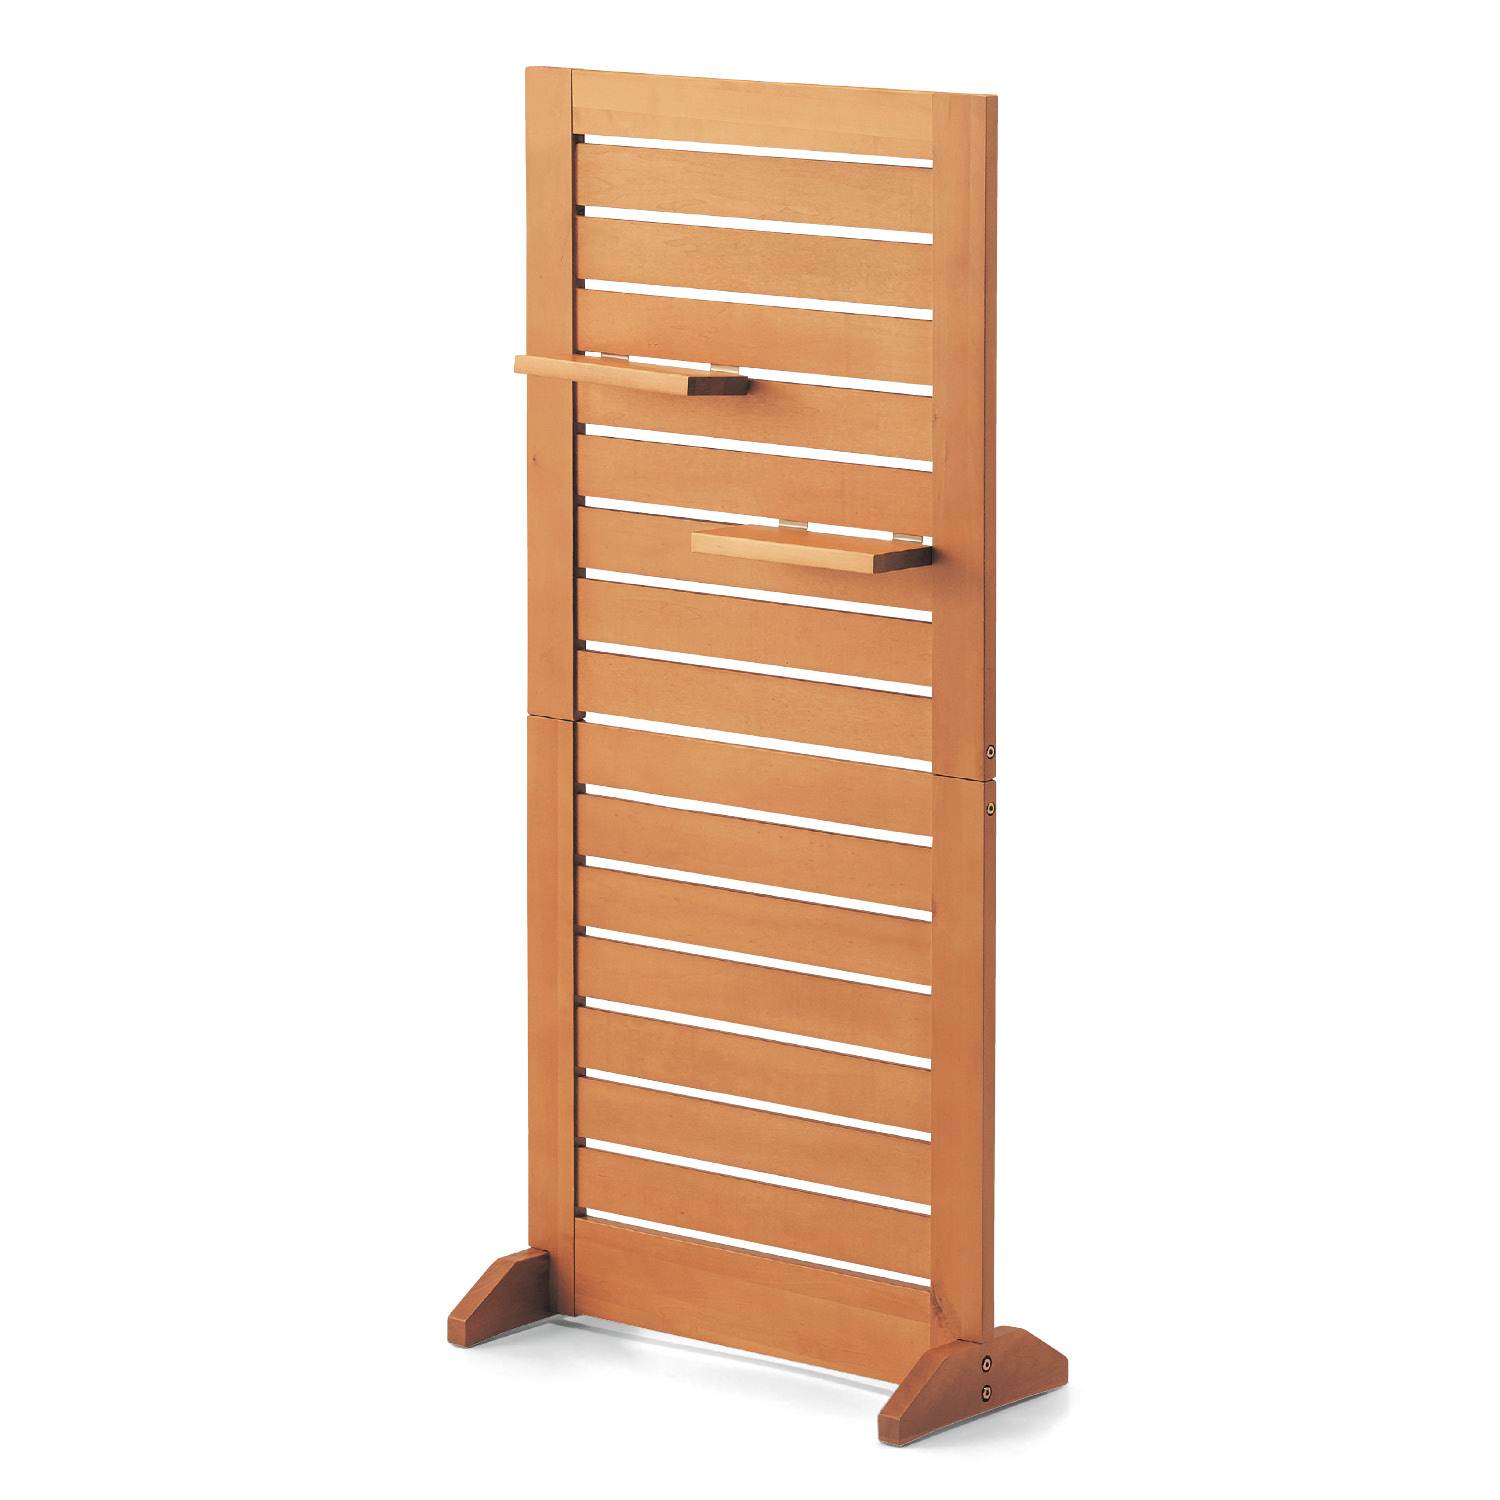  partition divider partition divider furniture wooden shelves attaching natural simple eyes .. space-saving Northern Europe design moveable shelves board independent stylish new life 